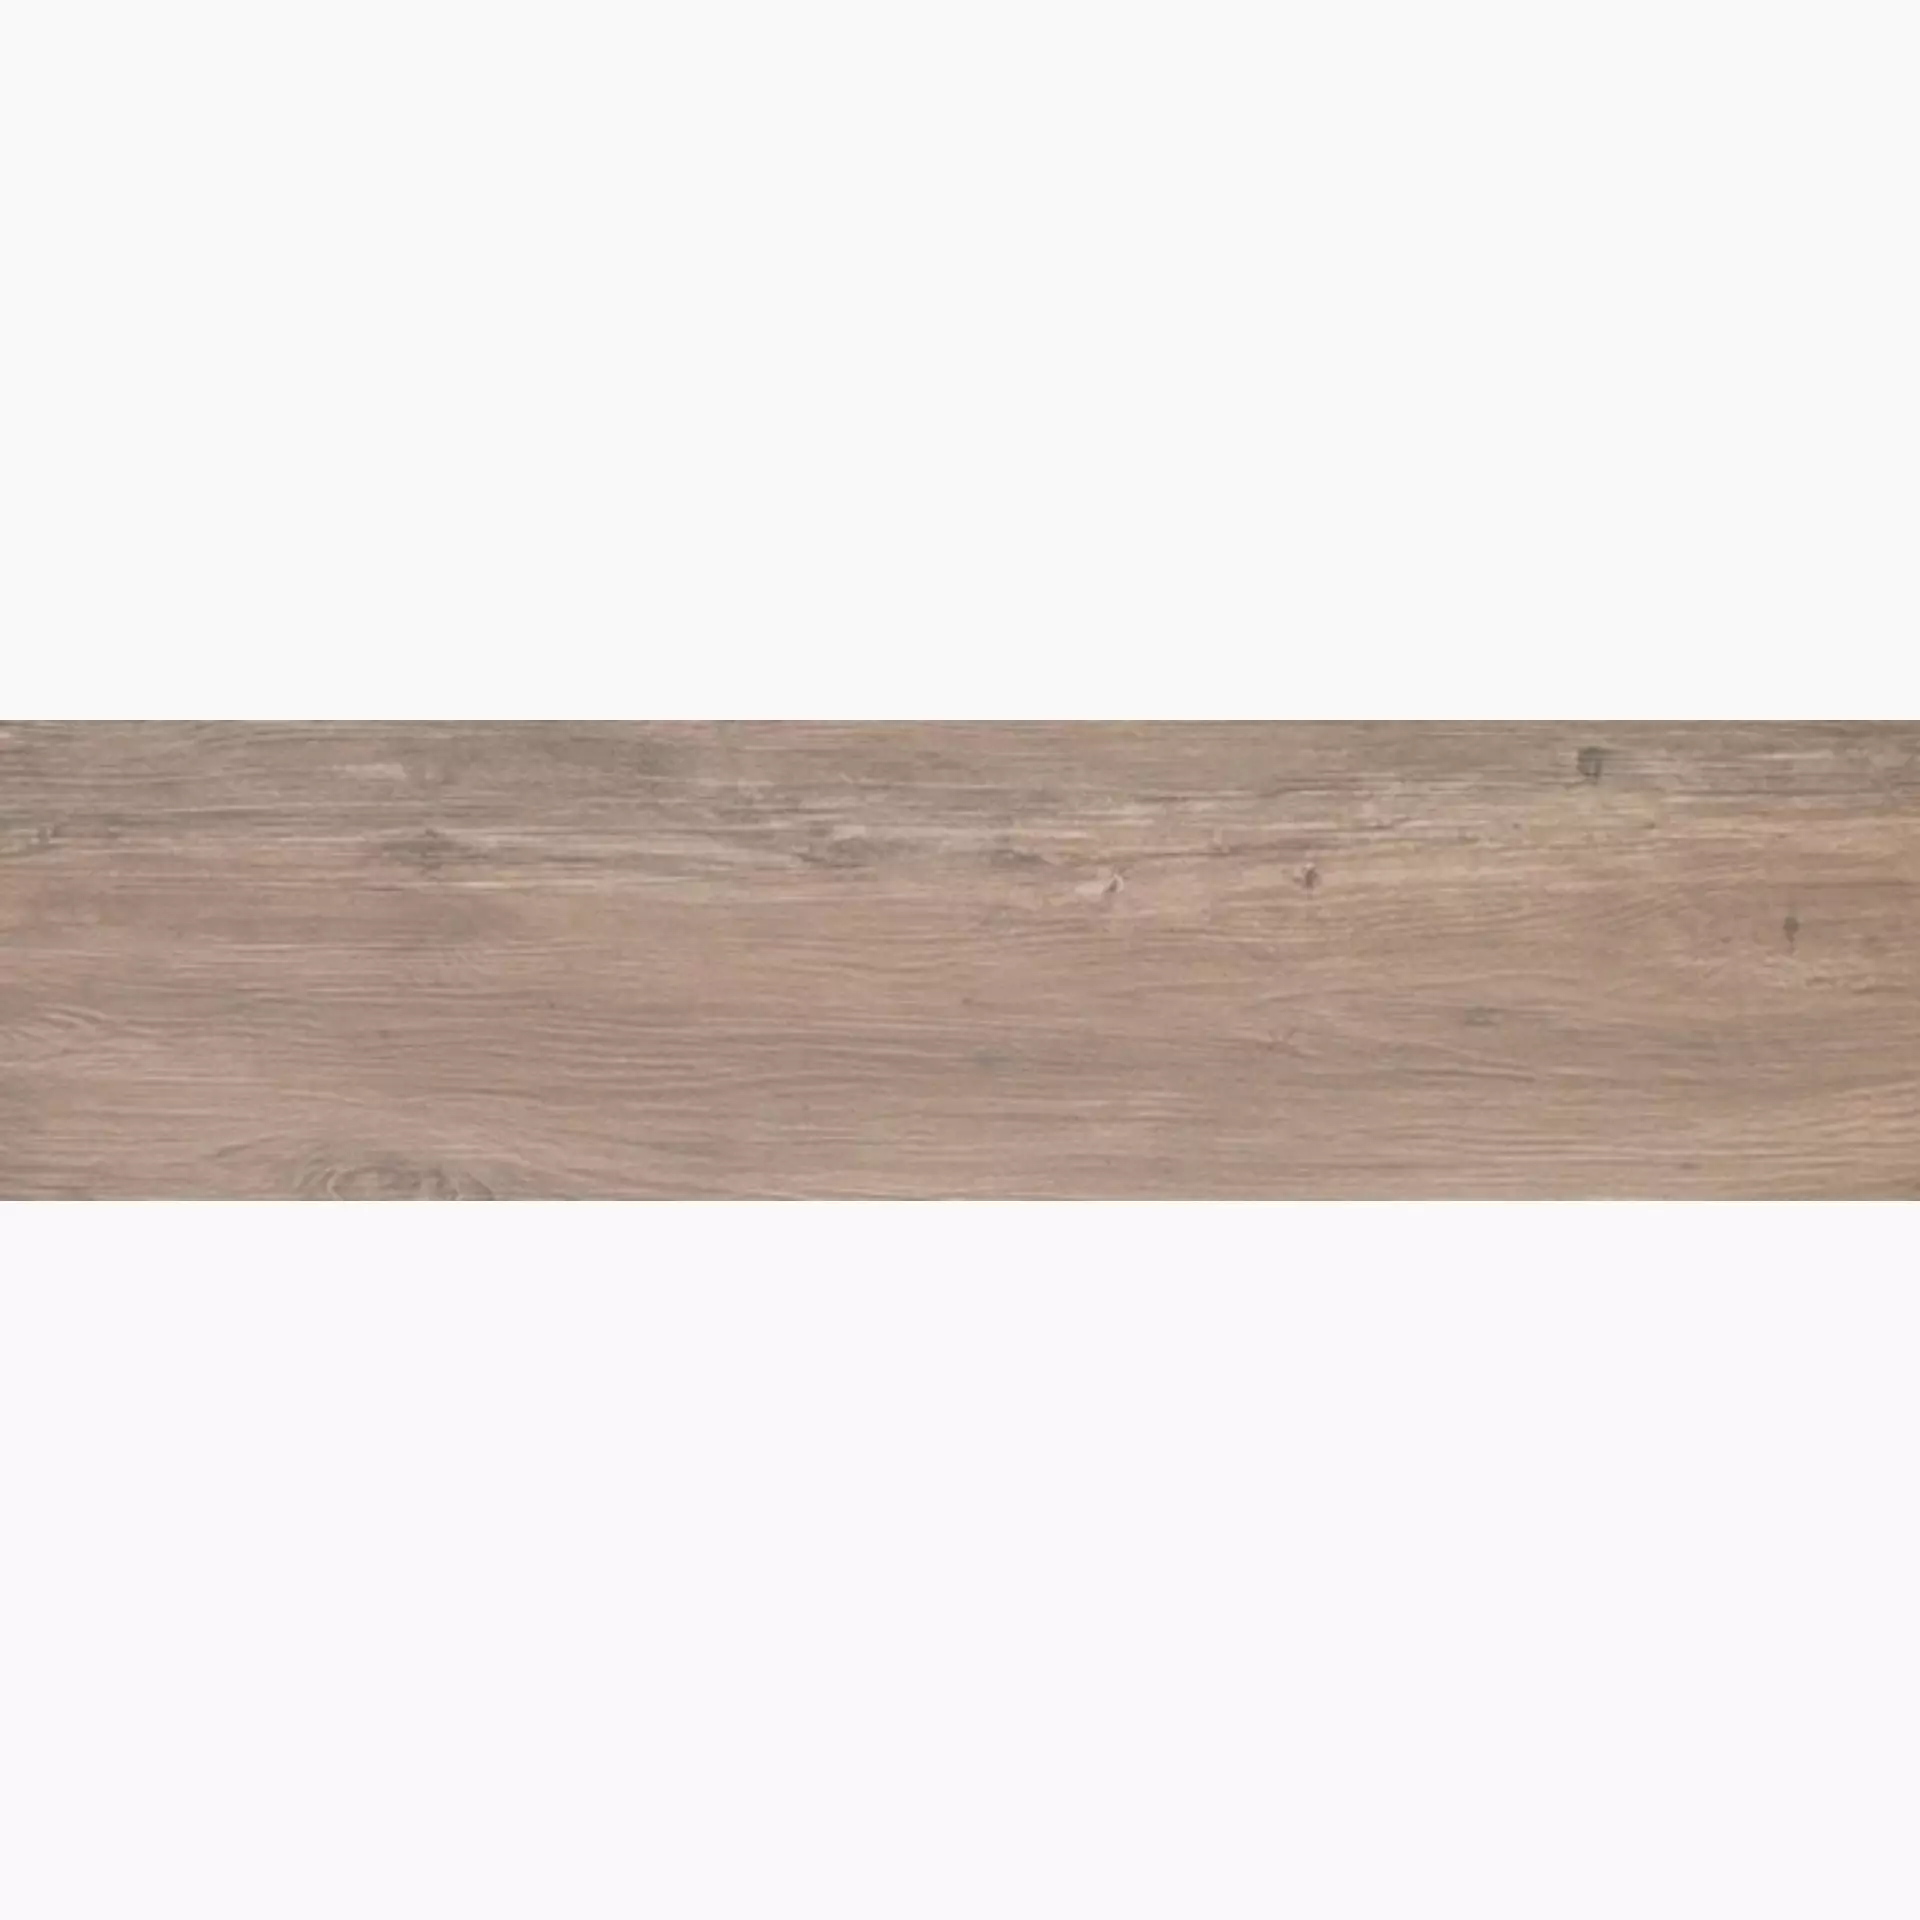 Serenissima Acanto Rovere Naturale 1047710 30x120cm rectified 9,5mm